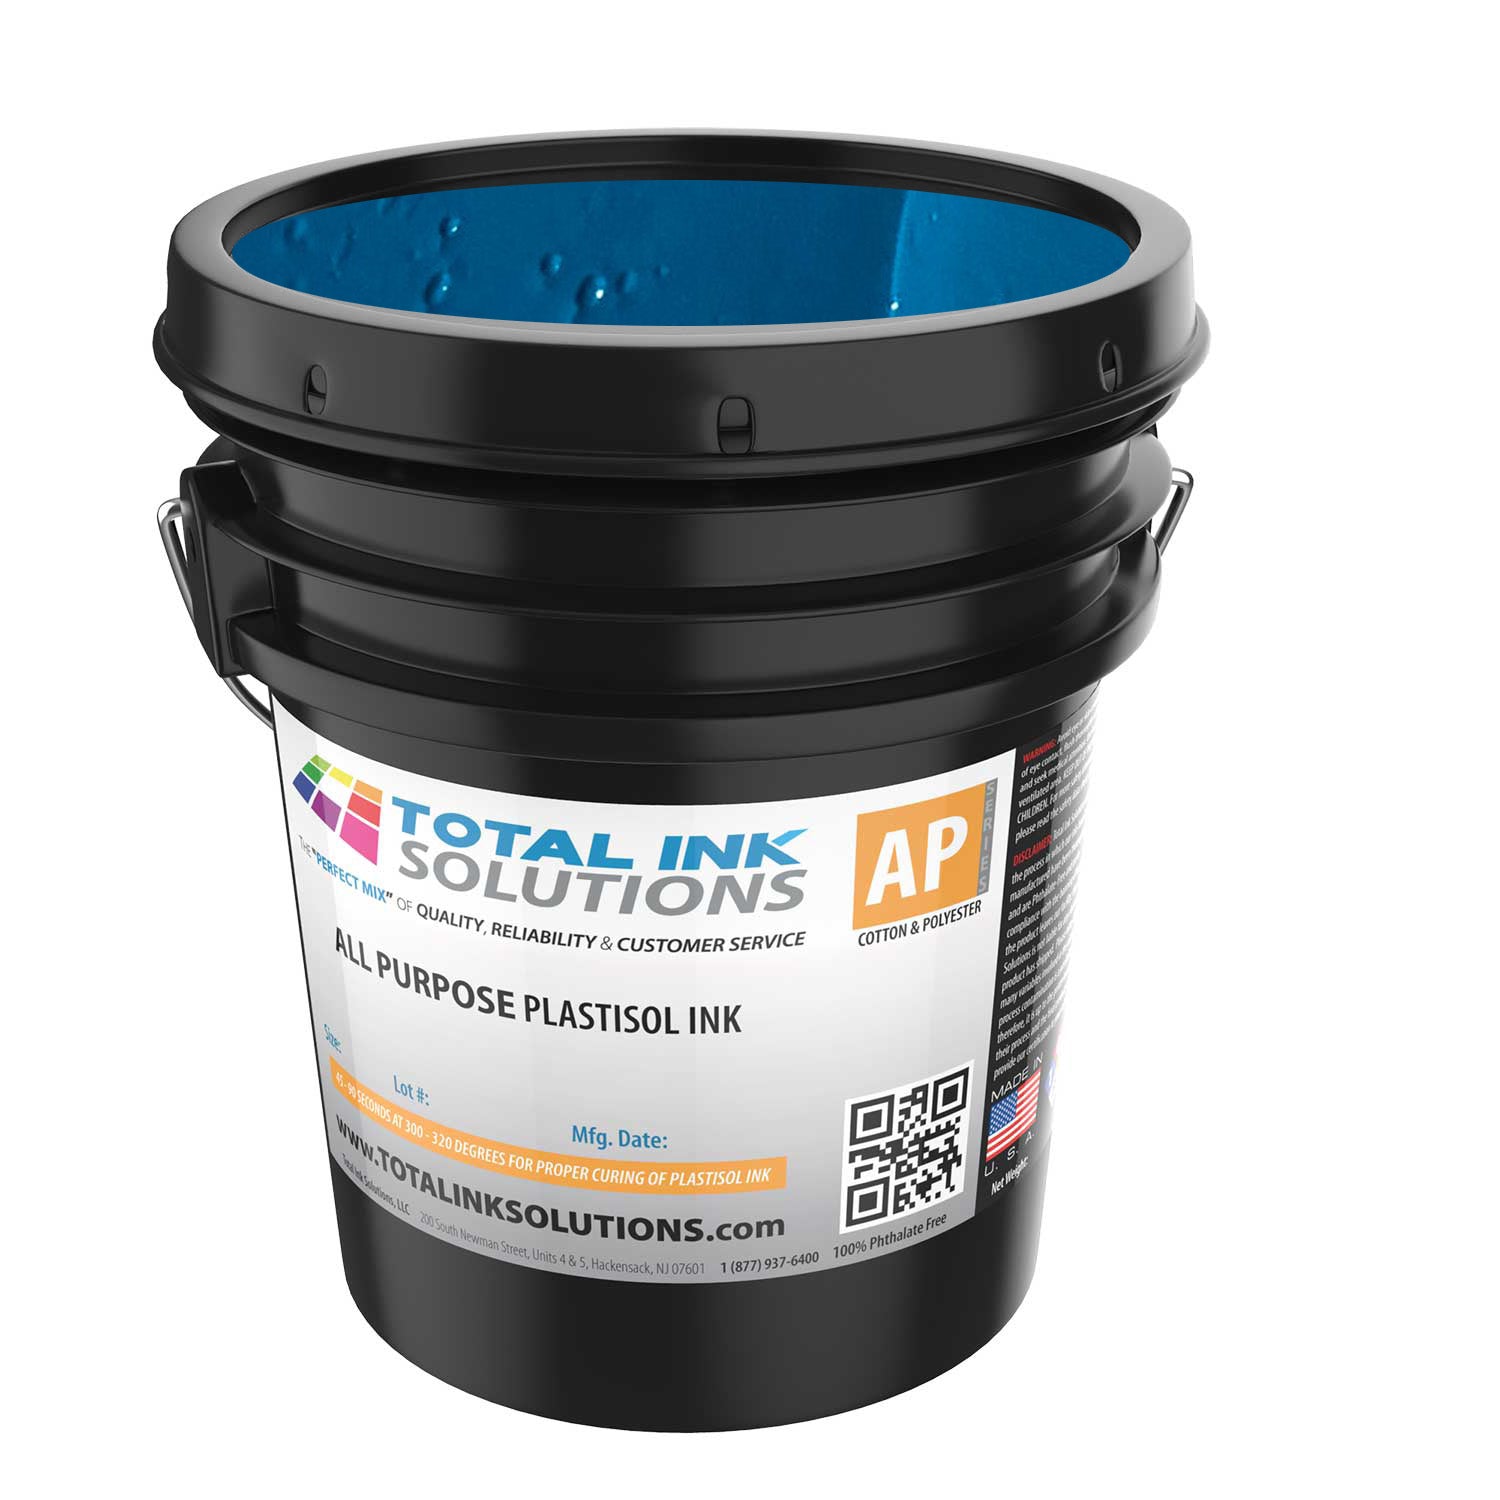 Total Ink Solutions: Premier Source for Vinyl, Heat Transfer Supplies, Screen Printing Supplies, Sublimation, DTG Equipment & More